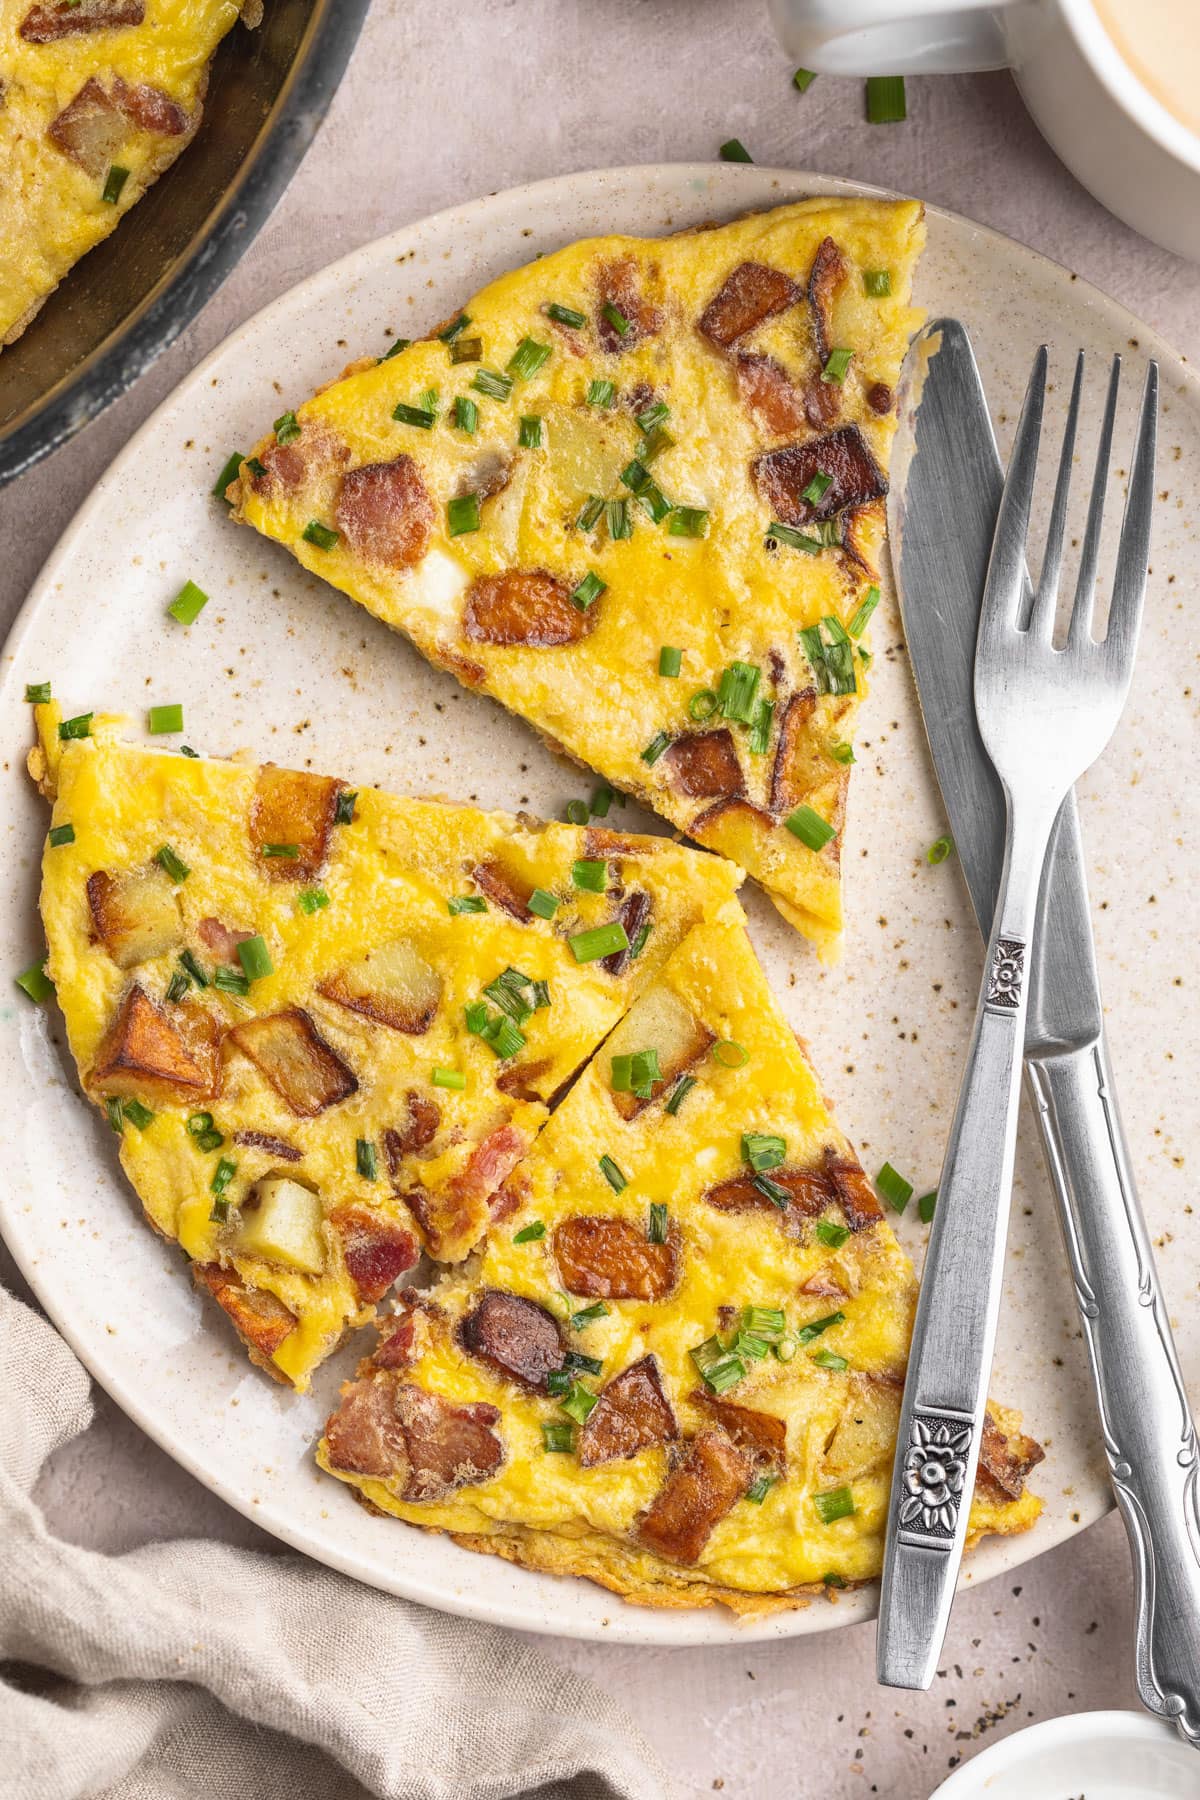 A country omelette, sliced into triangular wedges, on a plate with a fork and knife.